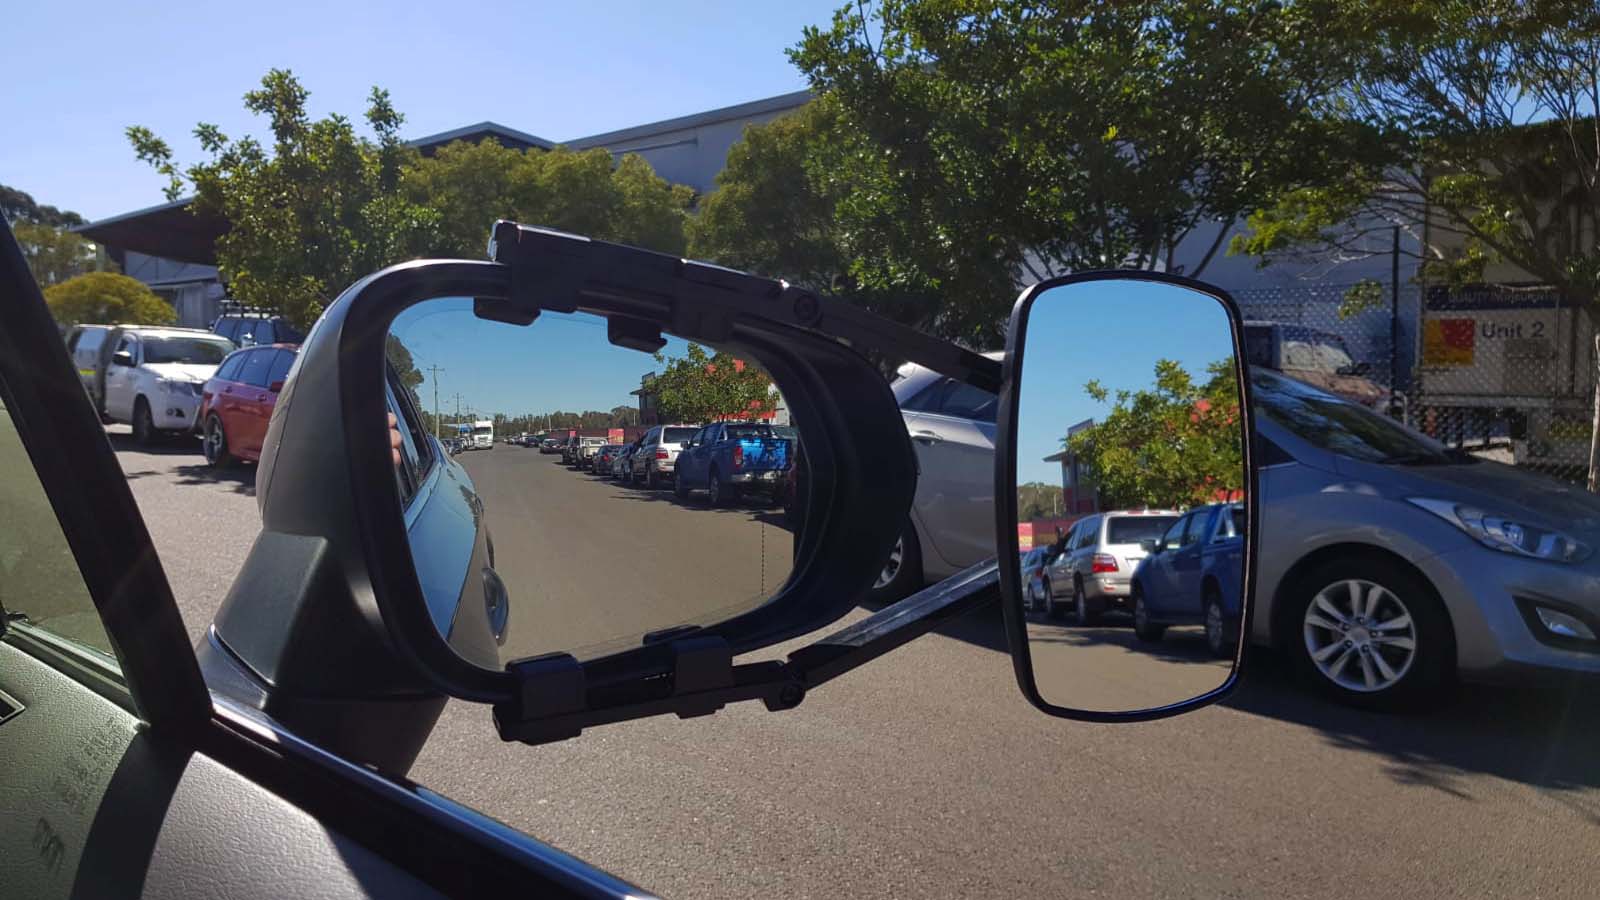 Choosing Towing Mirrors Guides, What Is The Best Mirror To Use When Towing A Caravan